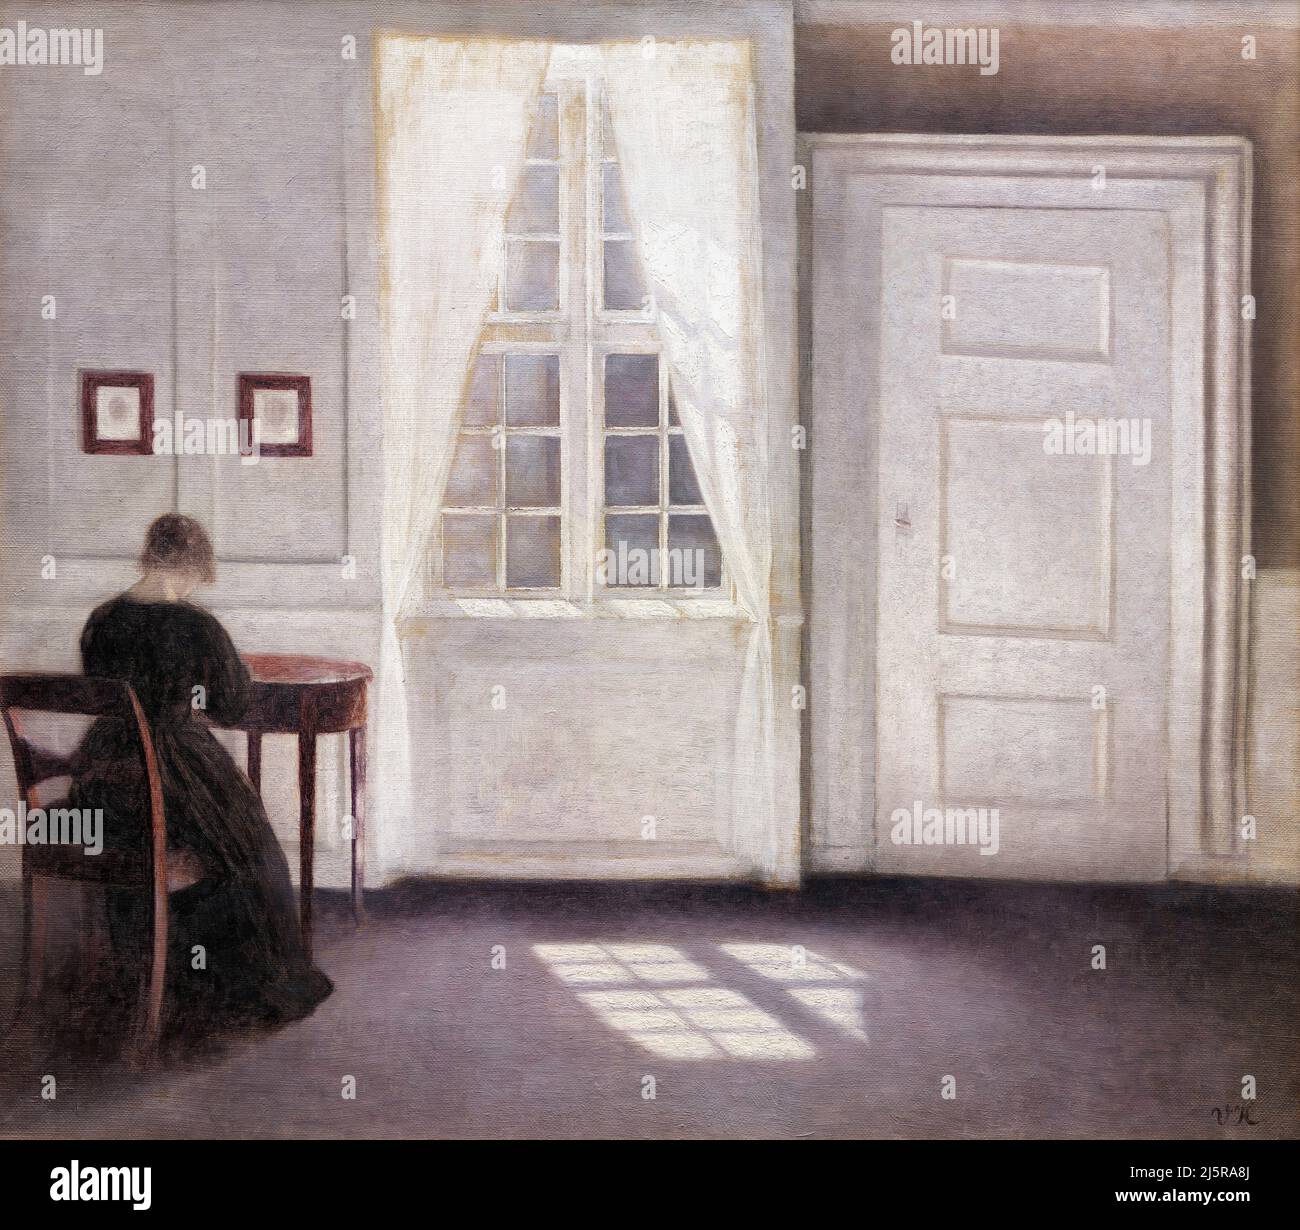 'A Room in the Artist's Home in Strandgade, Copenhagen, with the Artist's Wife' by the Danish artist, Vilhelm Hammershoi (1864-1916), oil on canvas, 1901 Stock Photo